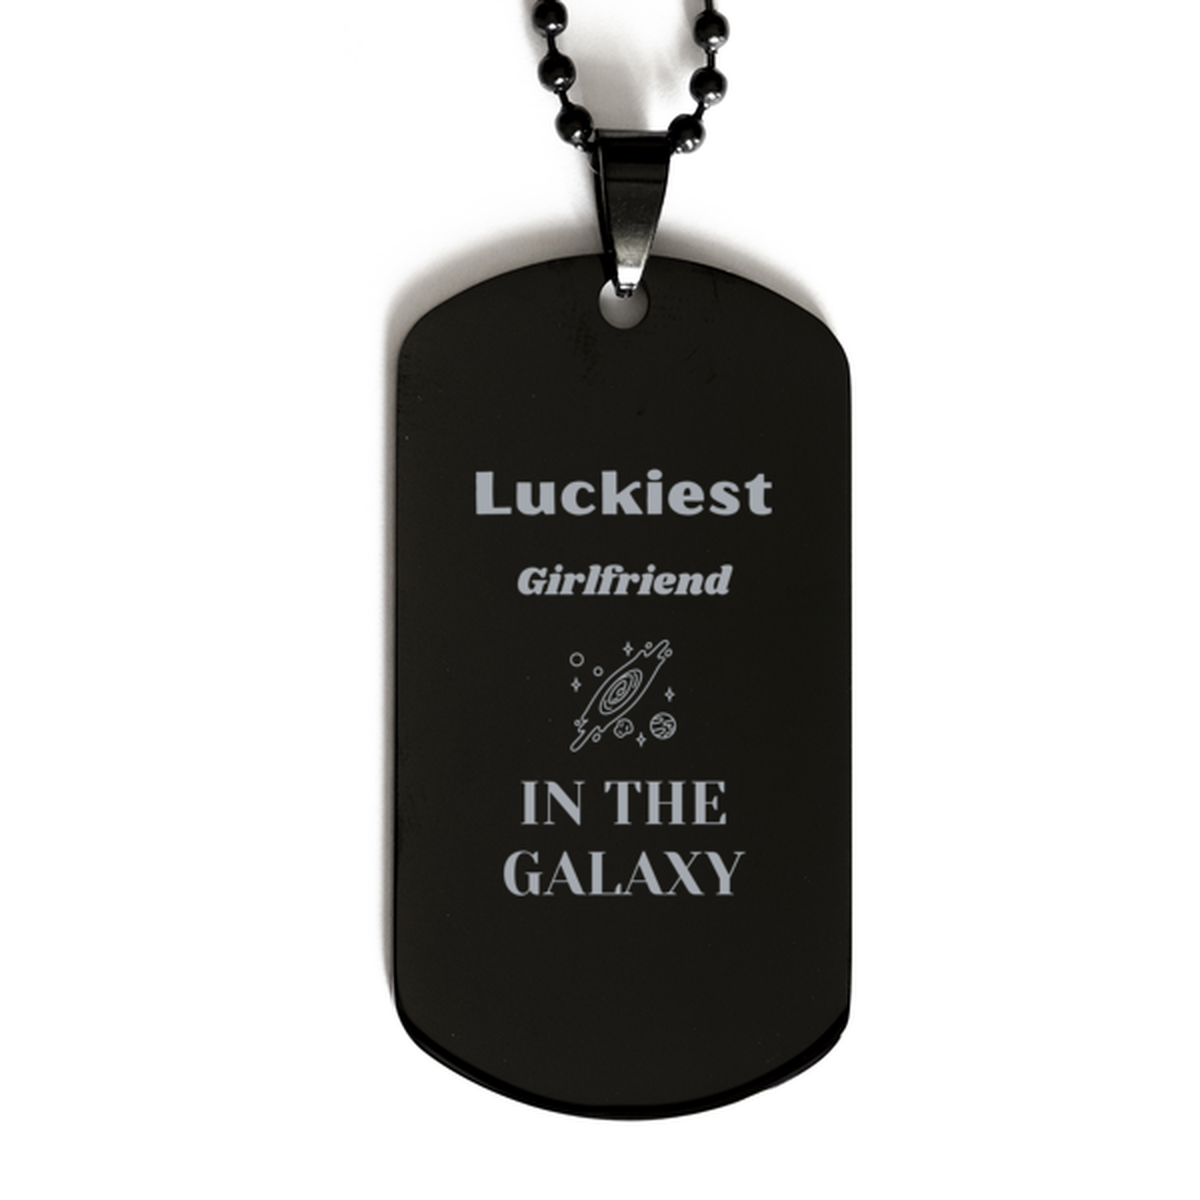 Luckiest Girlfriend in the Galaxy, To My Girlfriend Engraved Gifts, Christmas Girlfriend Black Dog Tag Gifts, X-mas Birthday Unique Gifts For Girlfriend Men Women